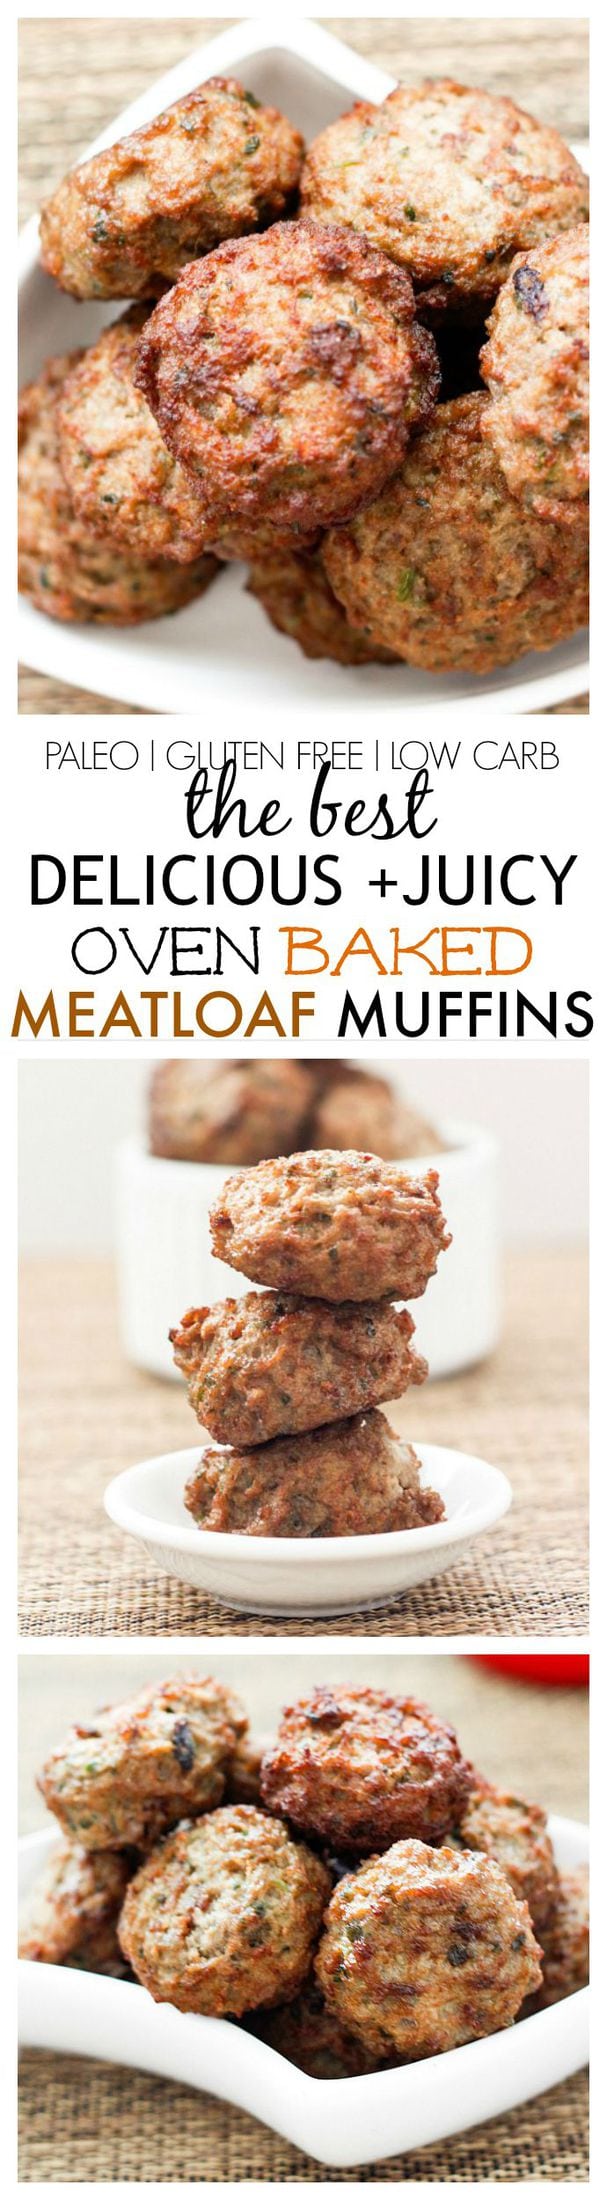 Healthy {delicious + juicy!} Oven Baked Meatloaf Muffins- Say goodbye to dry muffins- Perfect for batch cooking + freezing! {paleo + gluten free!}